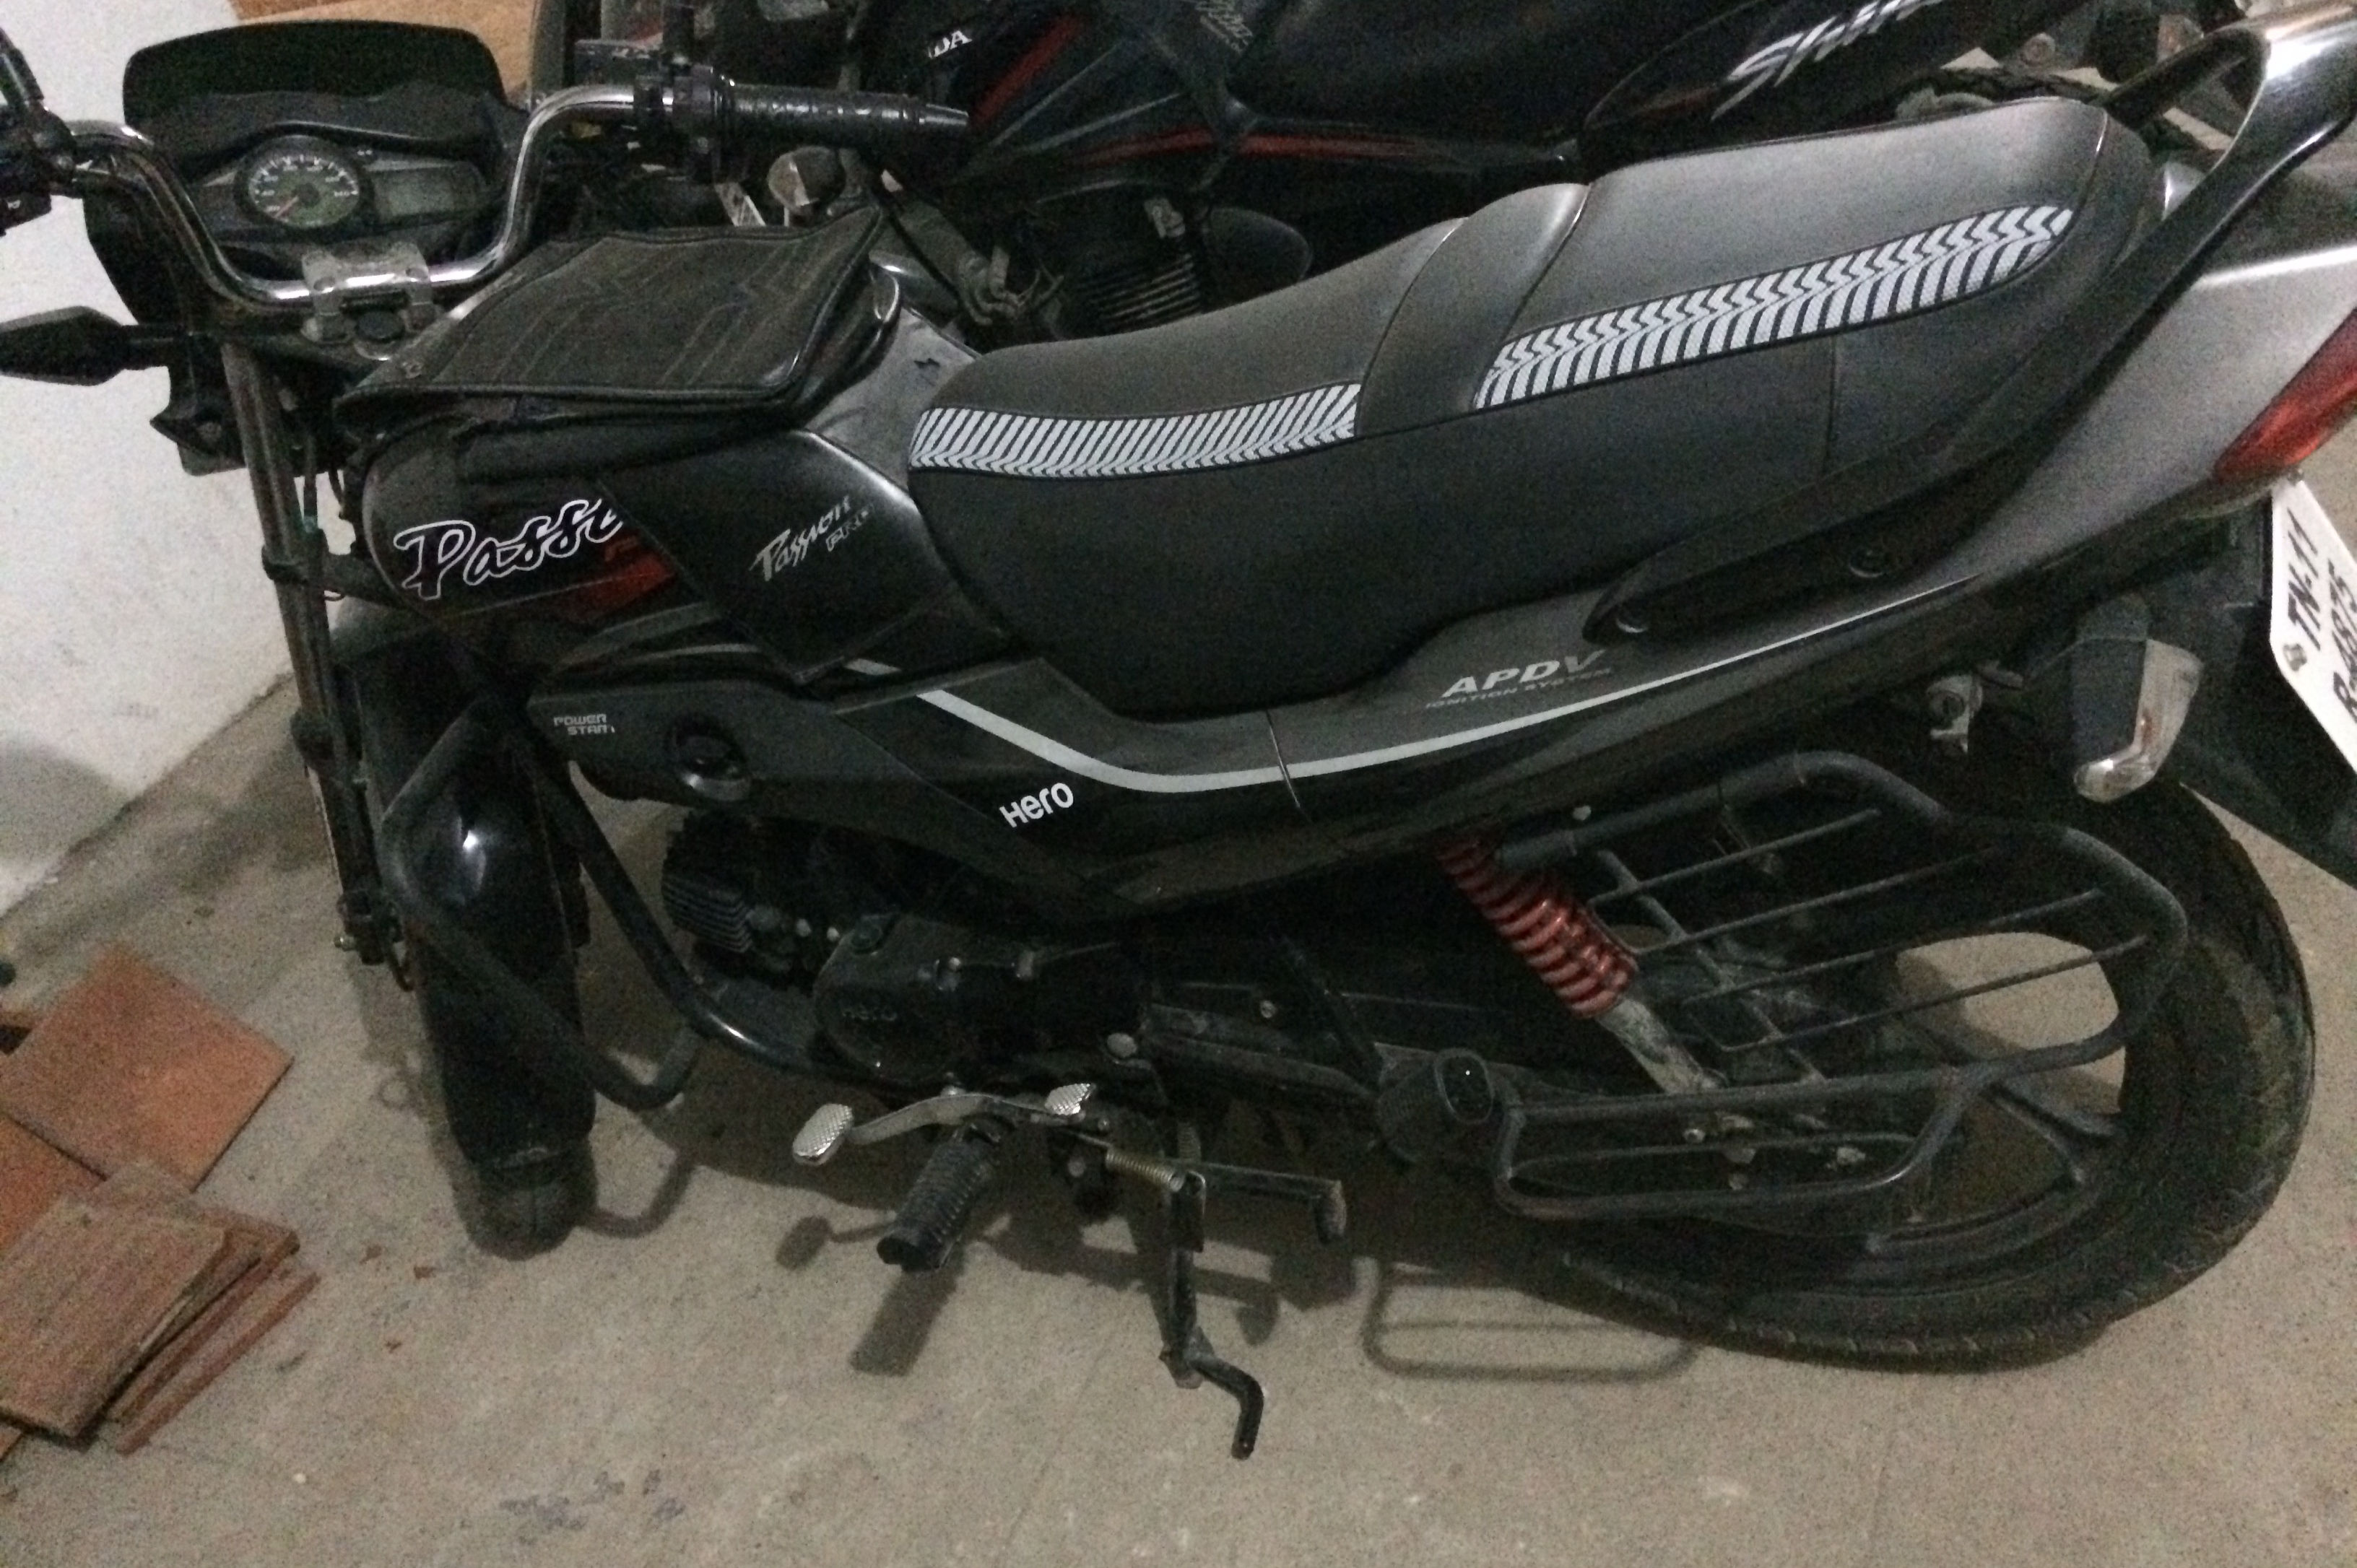 Second Hand Bikes in Chennai Used Bikes for Sale